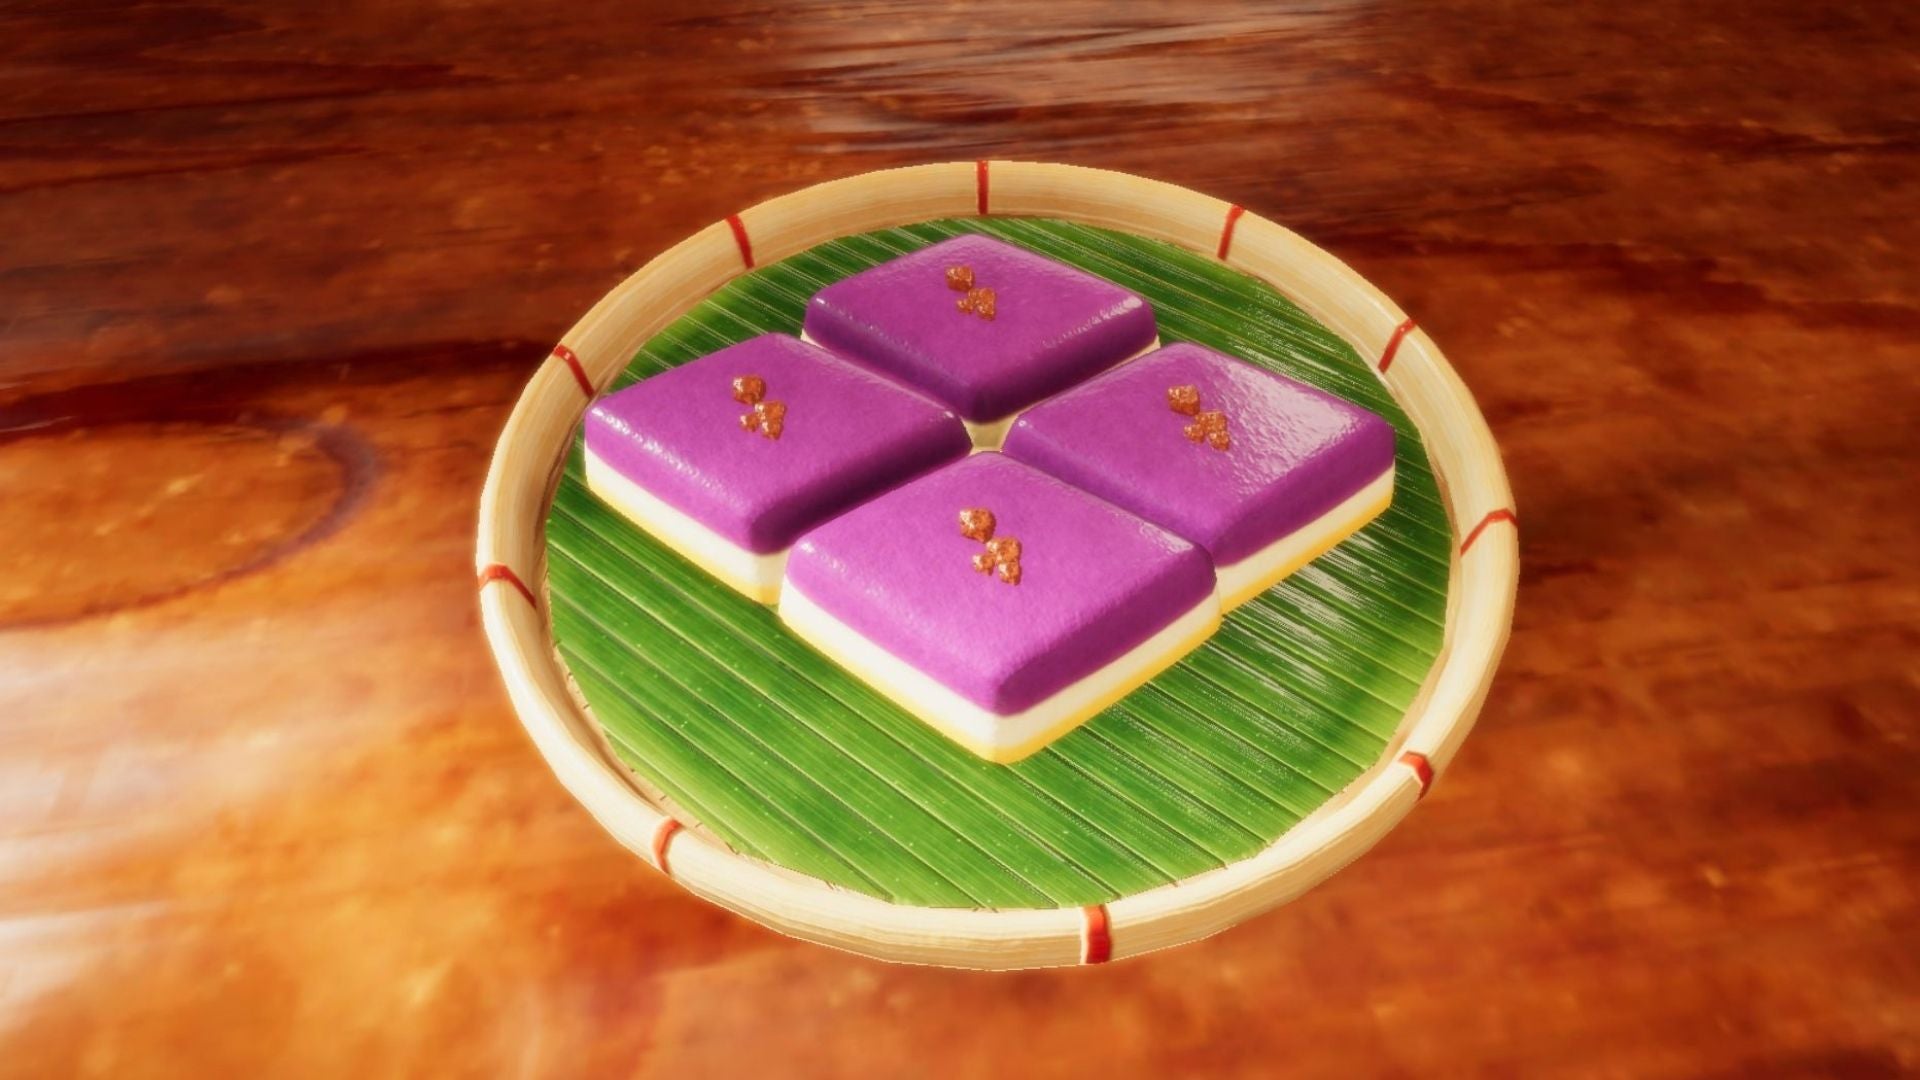 Looking forward too all the yummy dishes I can make in Soup Pot including this. Don't know what it is, but it looks amazing. (Screenshot: Chikon Club)